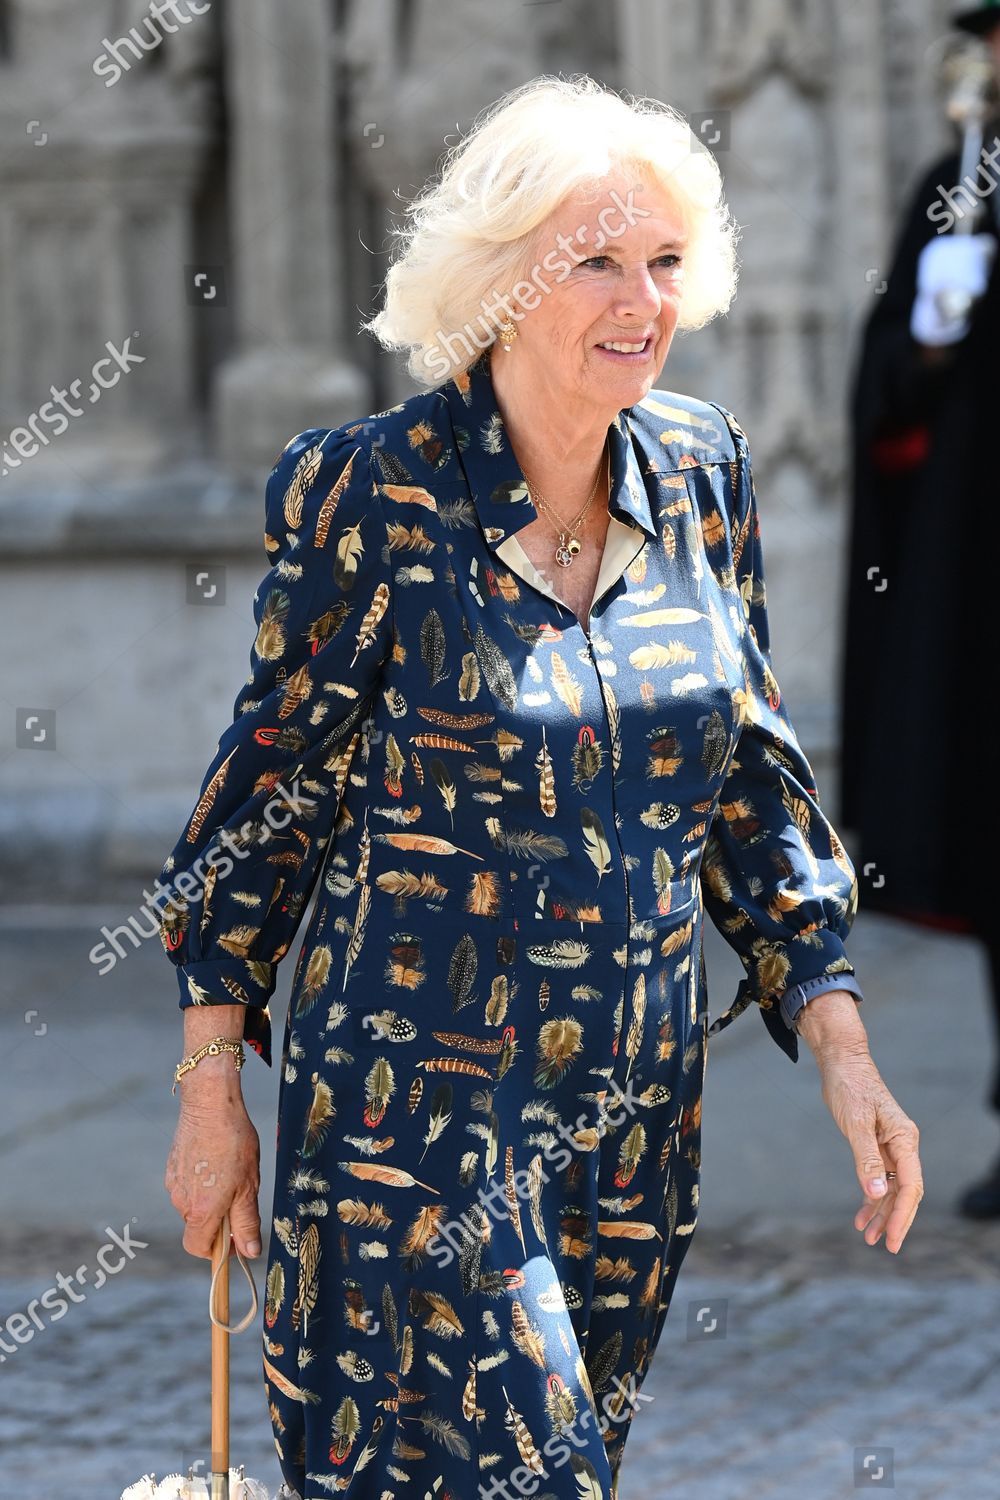 prince-charles-and-camilla-duchess-of-cornwall-visit-to-devon-and-cornwall-day-1-uk-shutterstock-editorial-12221468f.jpg